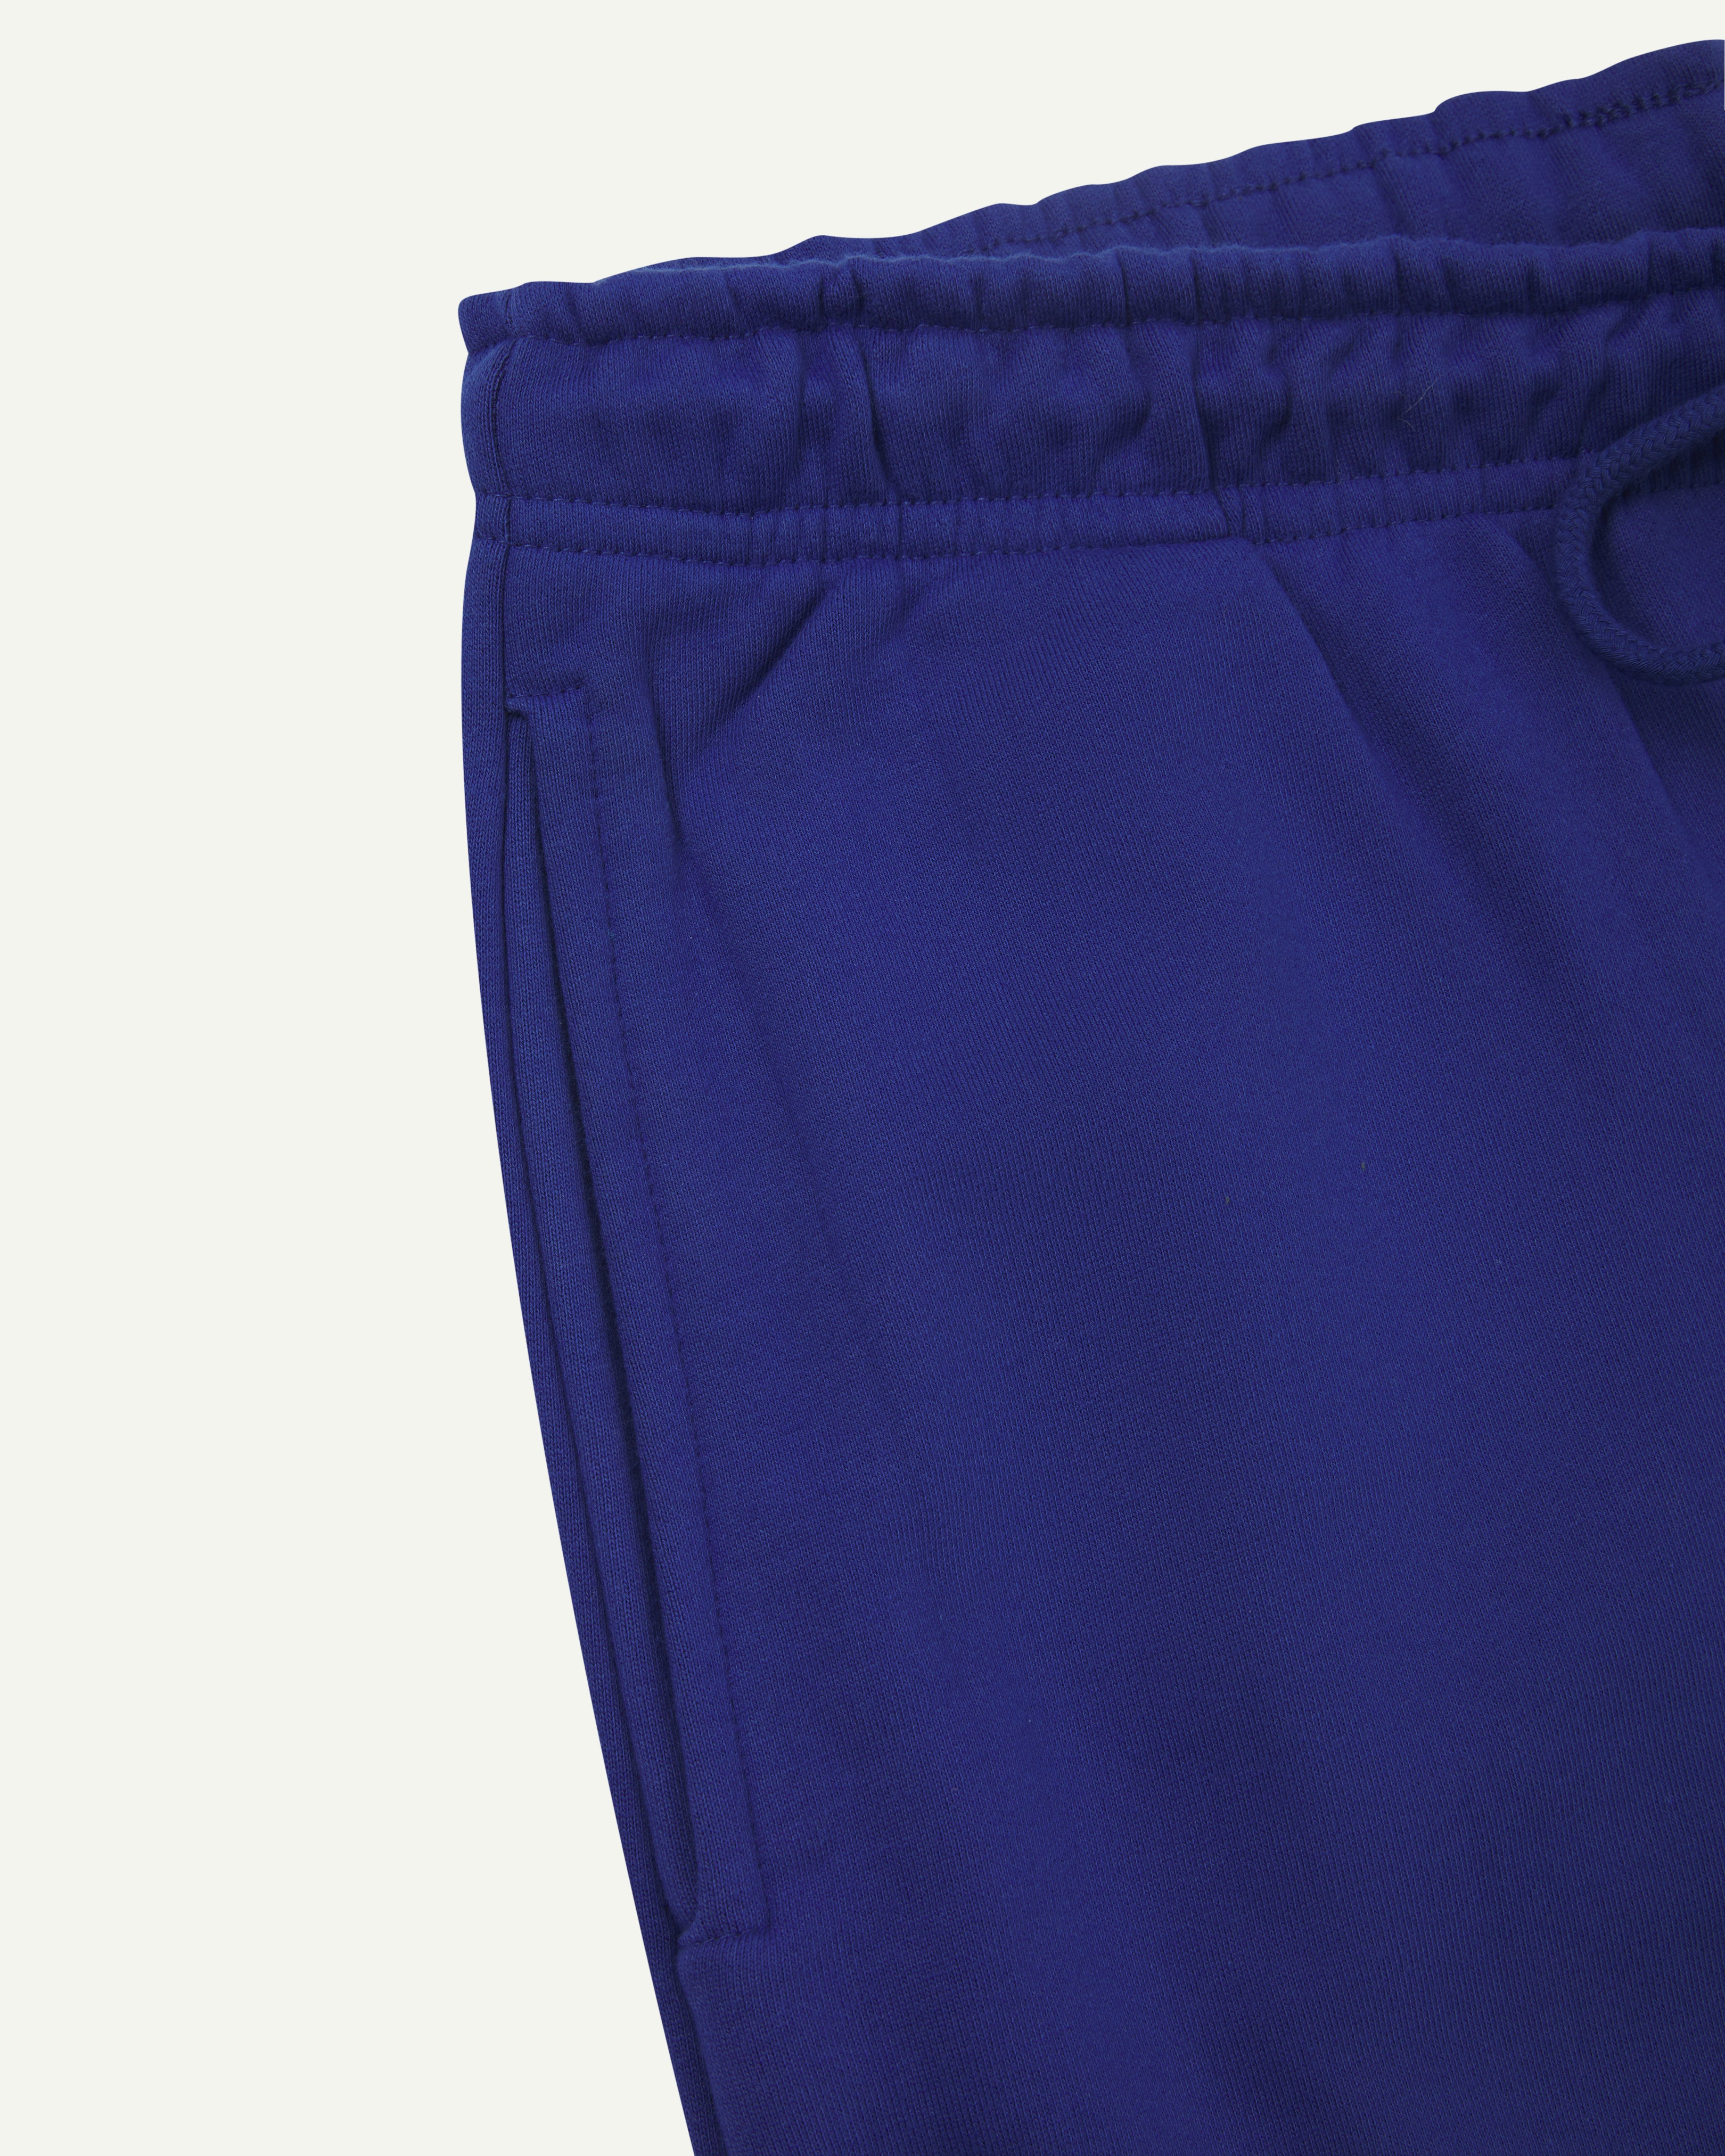 Close-up view of bright blue organic cotton Jogging Pants for men by Uskees showing the drawstring waist and side pocket detail.